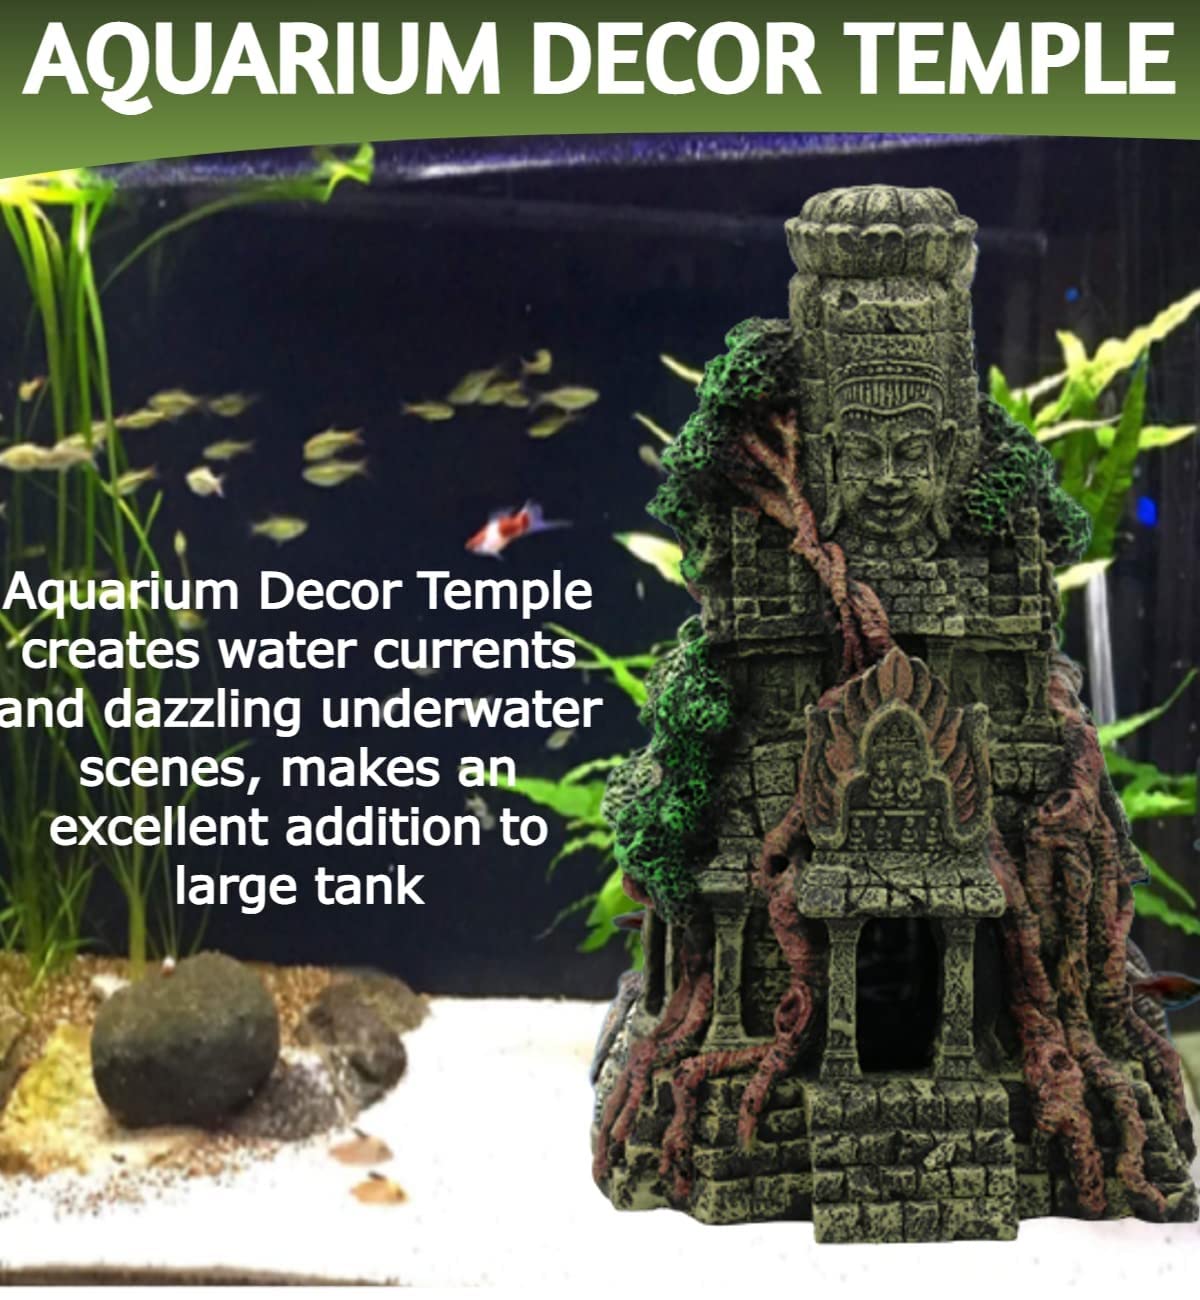 10.6 inch Aquarium Decoration Ornaments for Fish Tank Underwater Landscape Hideaway Fish Tank Scenery for Betta (Temple Buddha) Suitable from 8 Litre Fish Tank